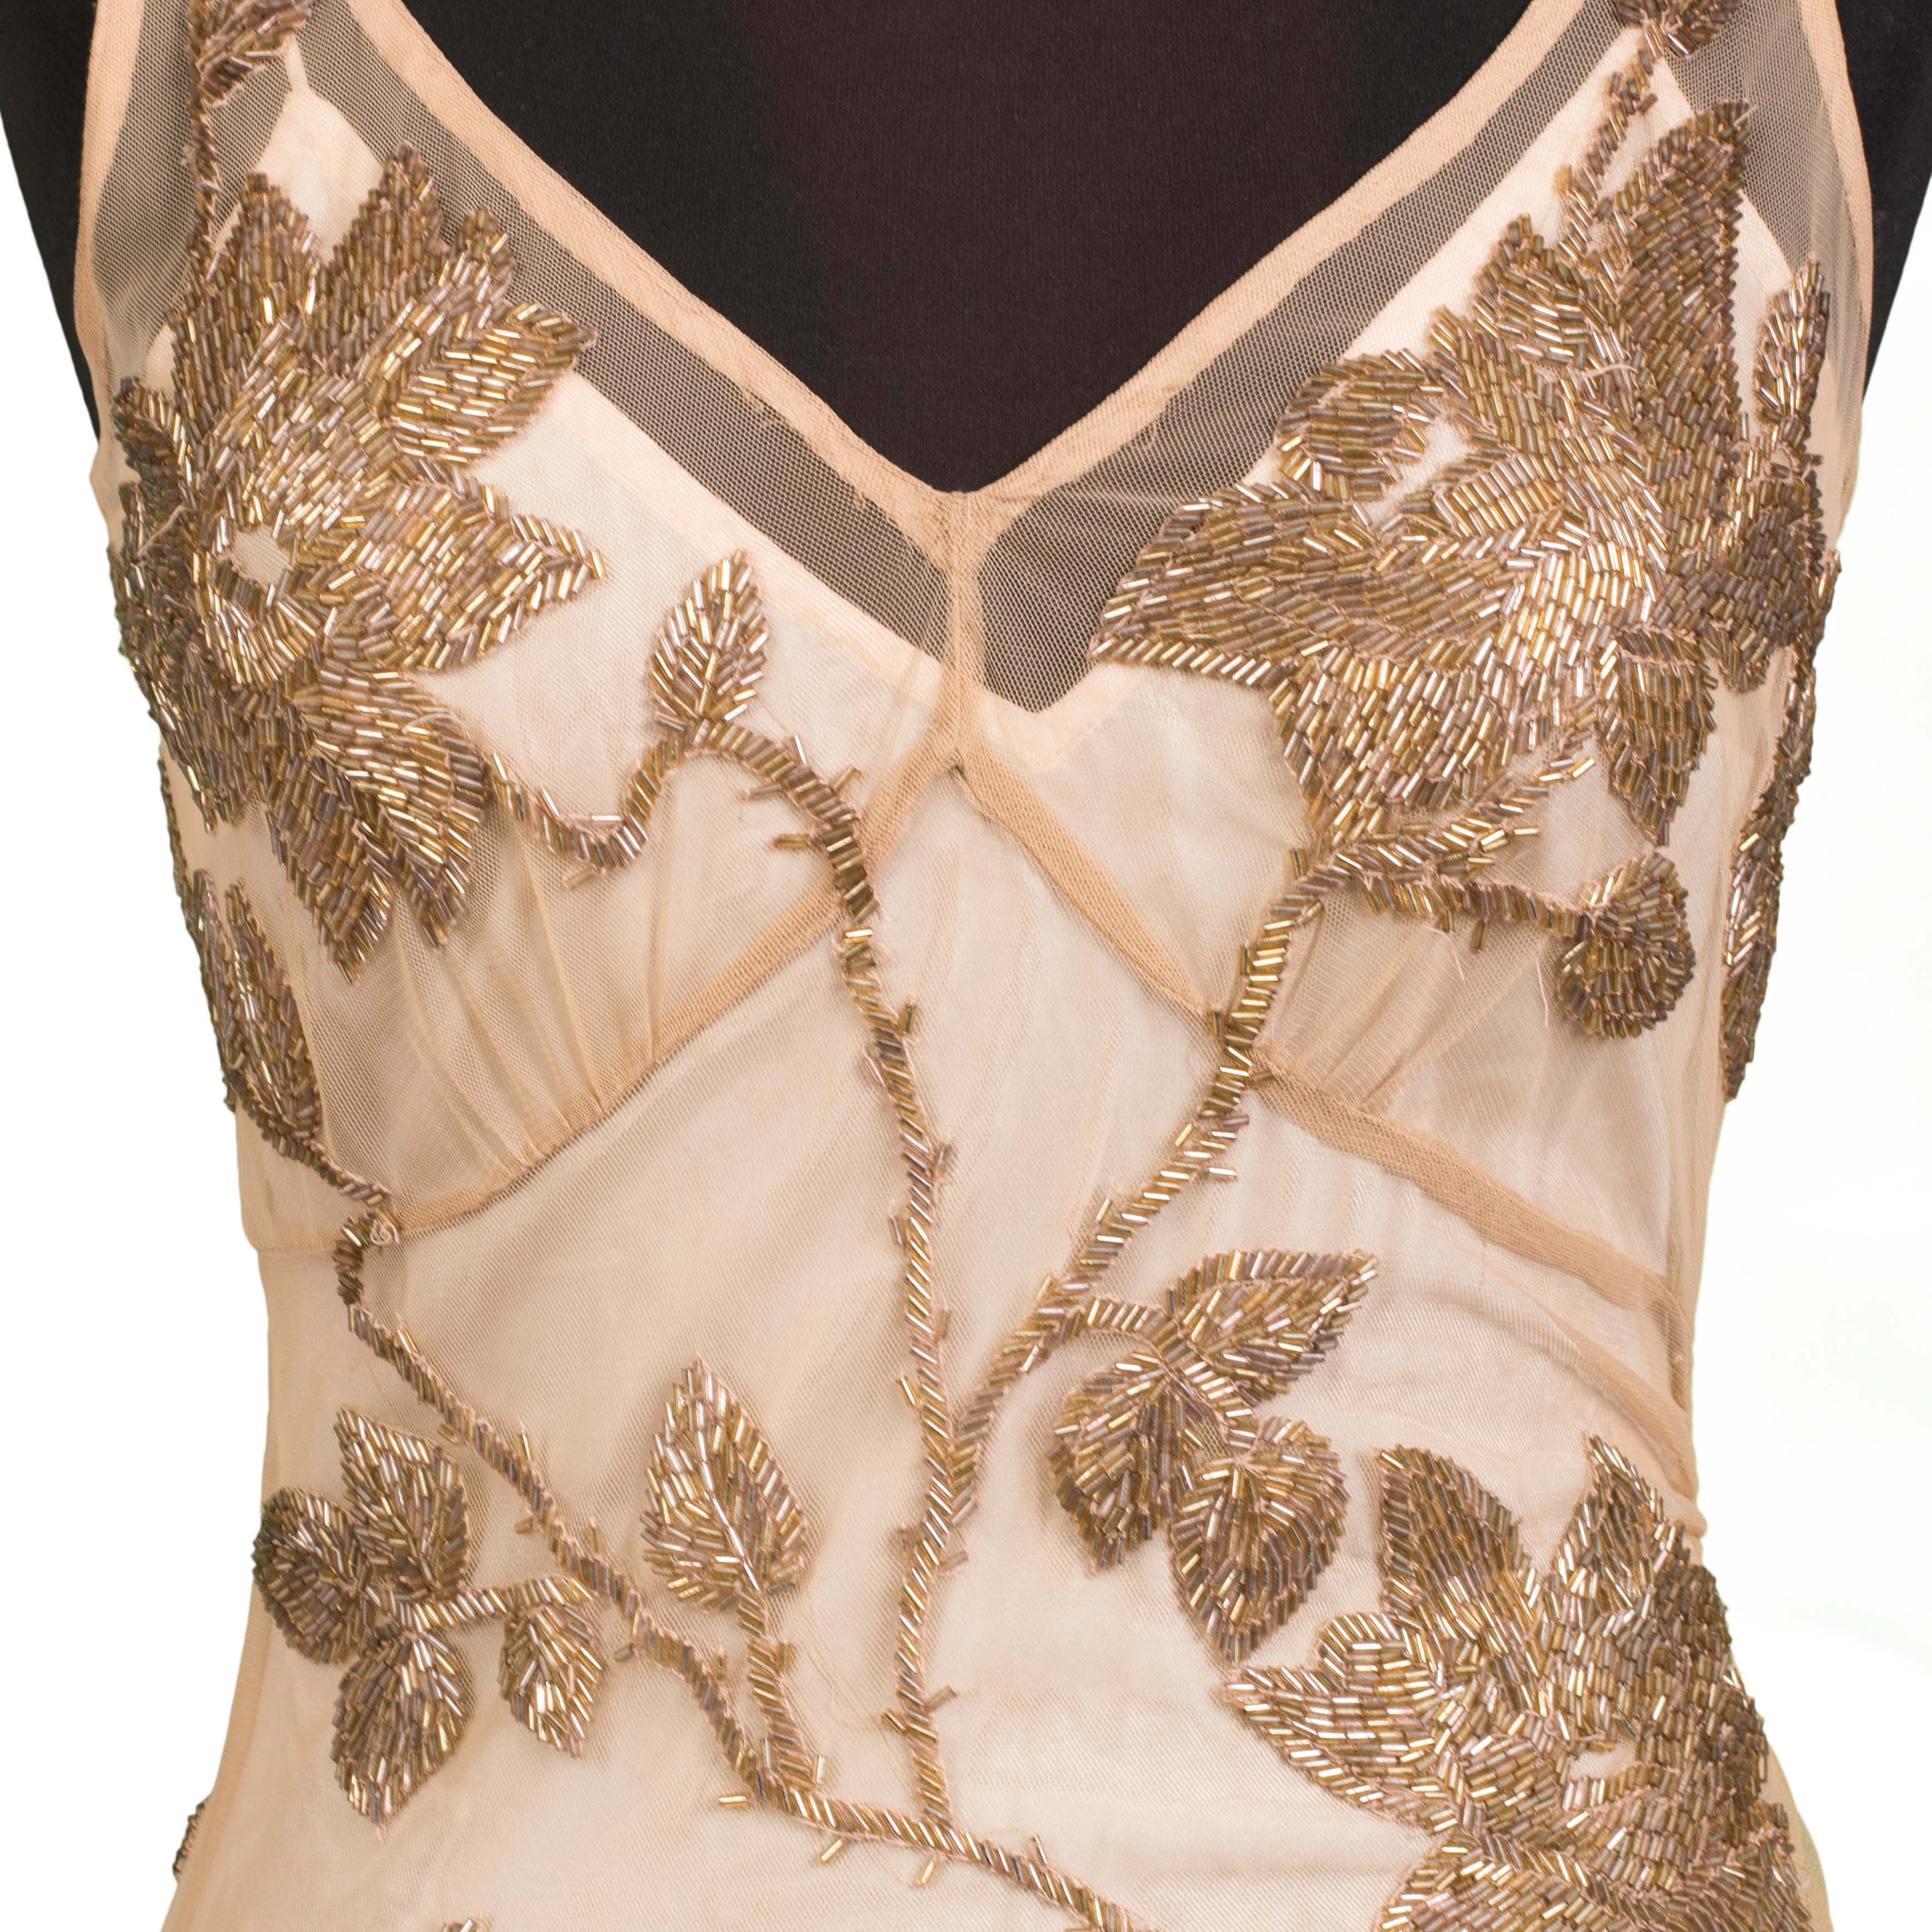 TRACY REESE Gold Floral Beaded Top with Silk Lining NEW US 4 WOMEN'S BOUTIQUE